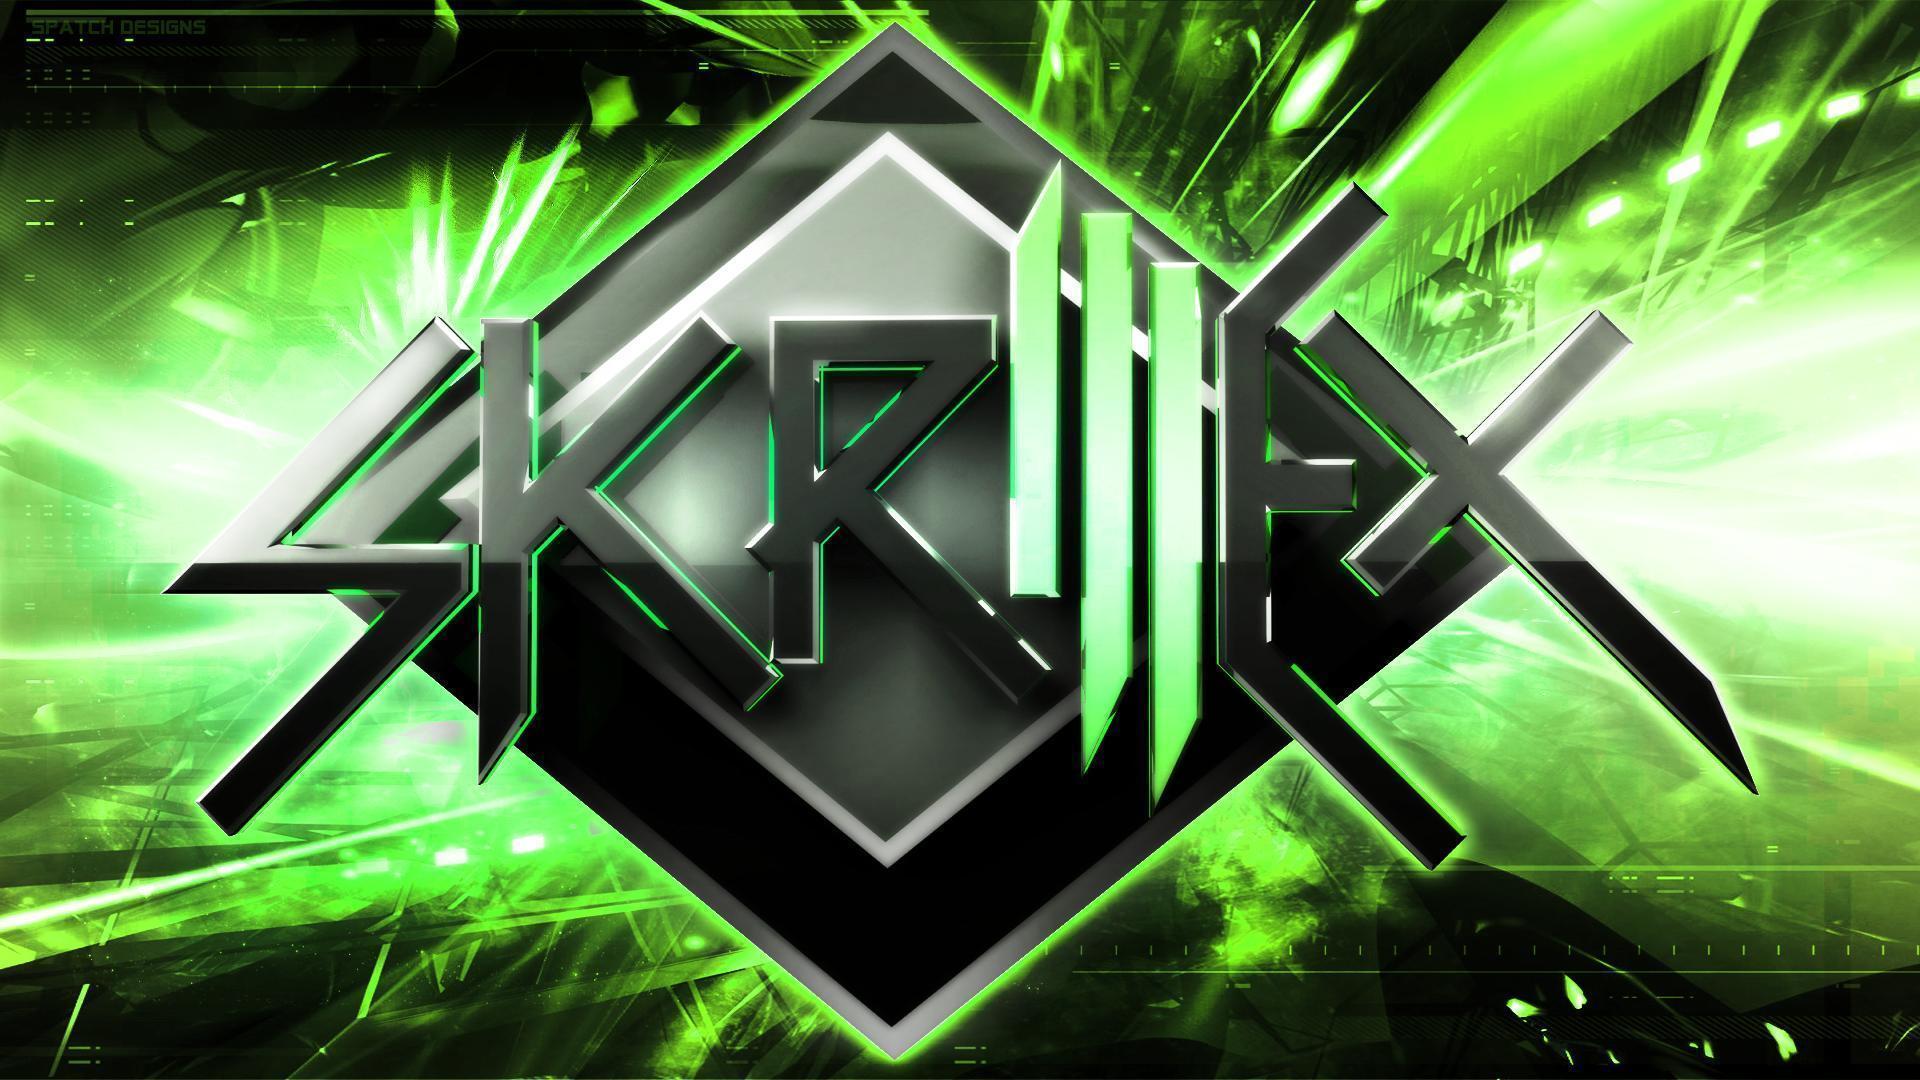 Skrillex Wallpapers Green by SpatchDesigns